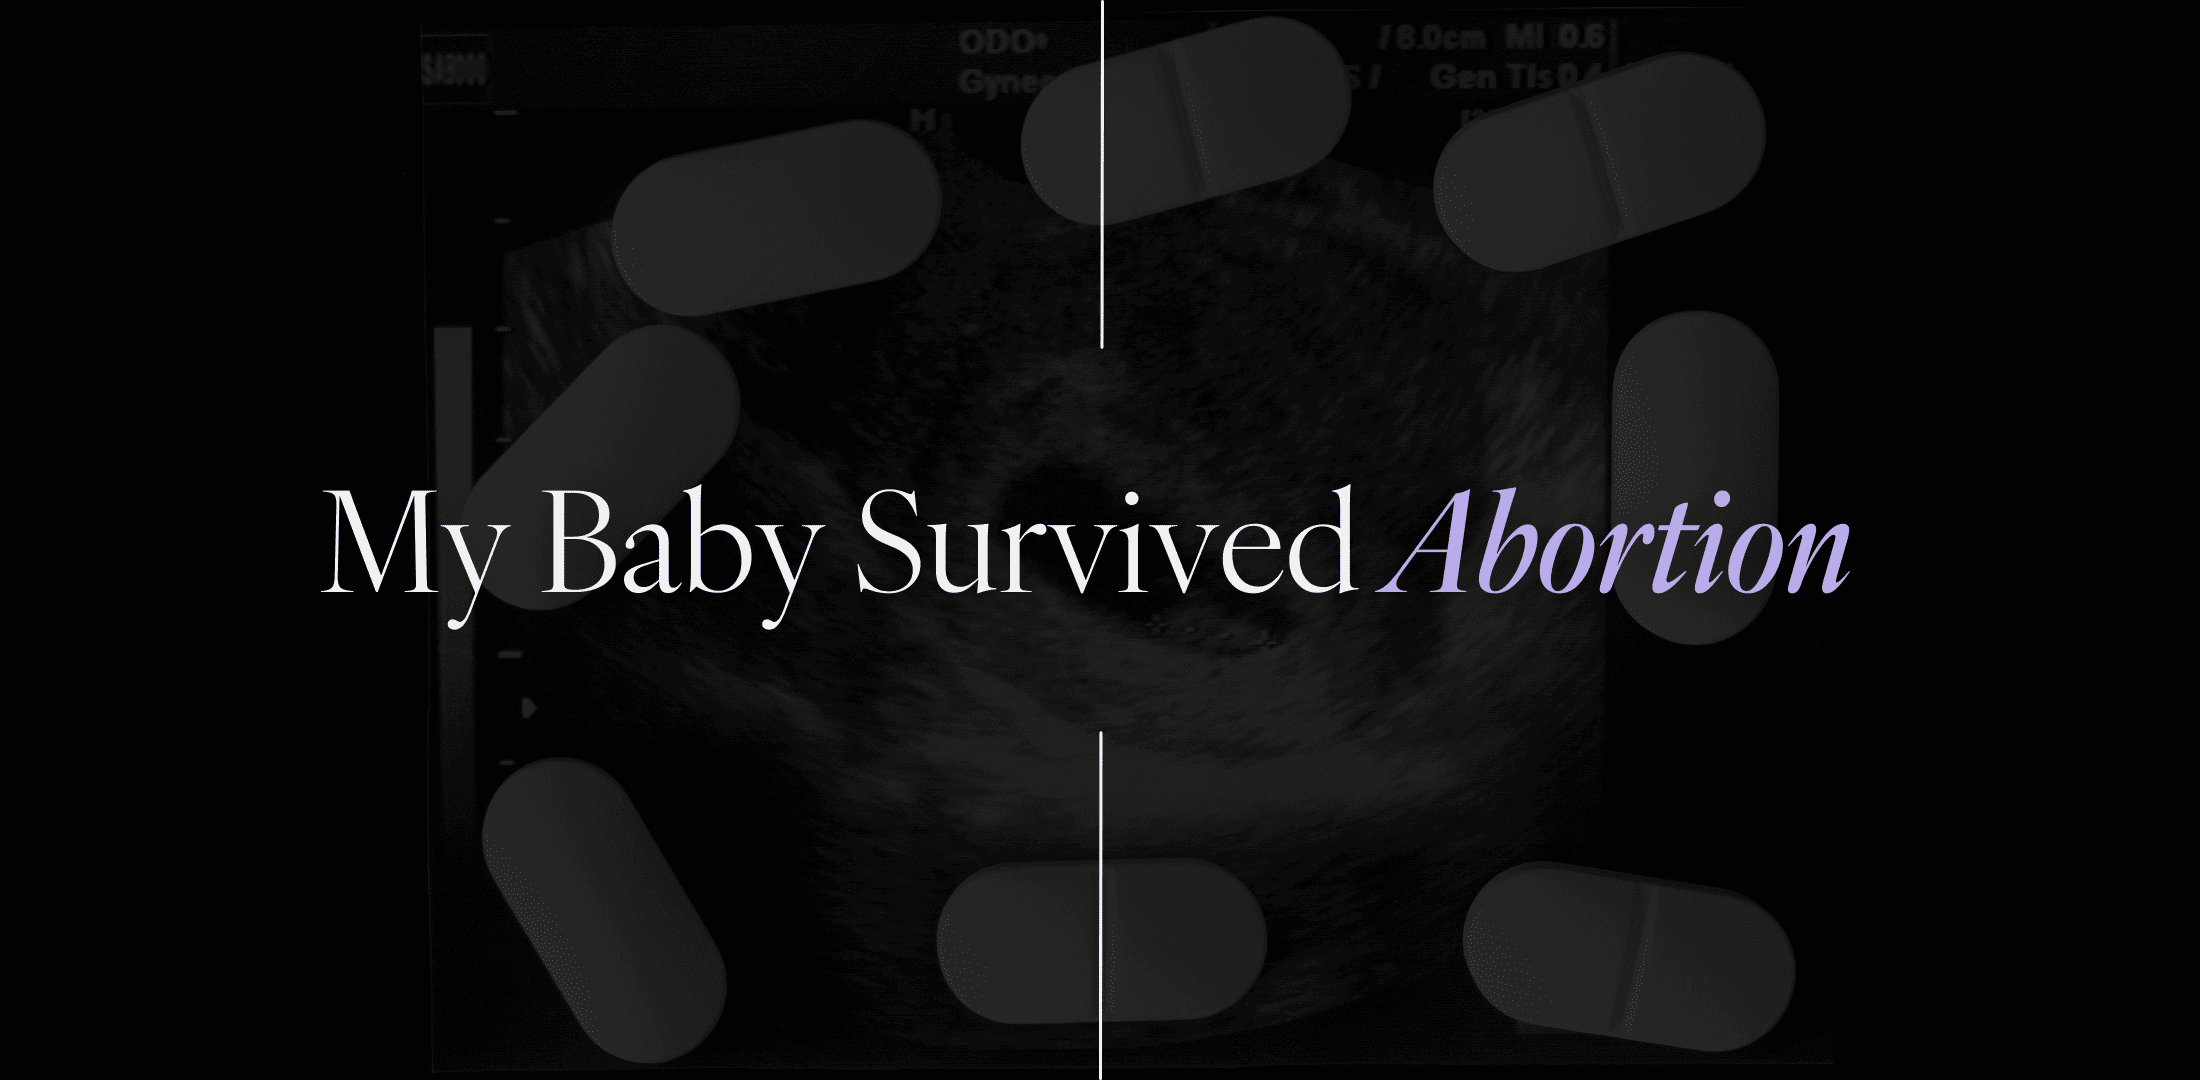 My baby survived abortion in my failed abortion.